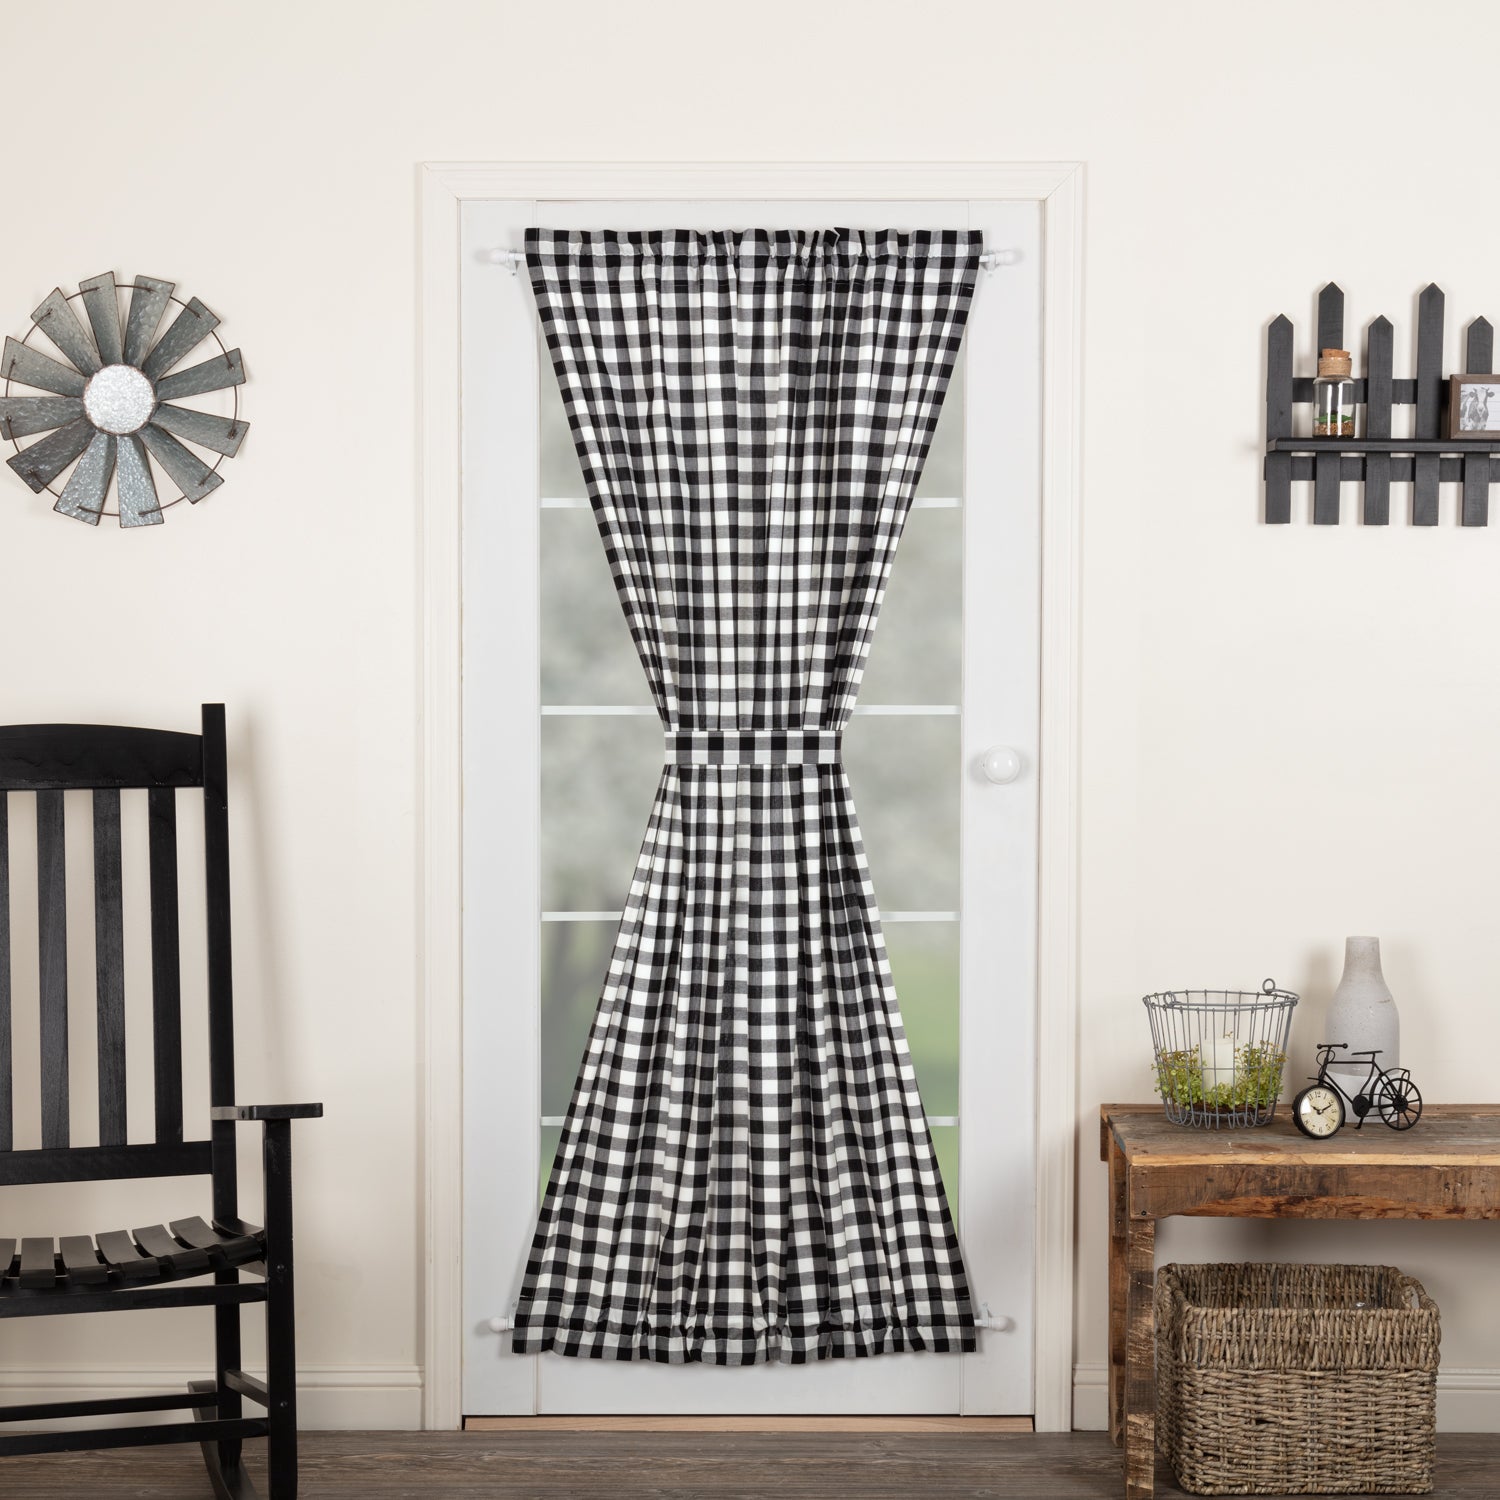 April & Olive Annie Buffalo Black Check Door Panel 72x40 By VHC Brands